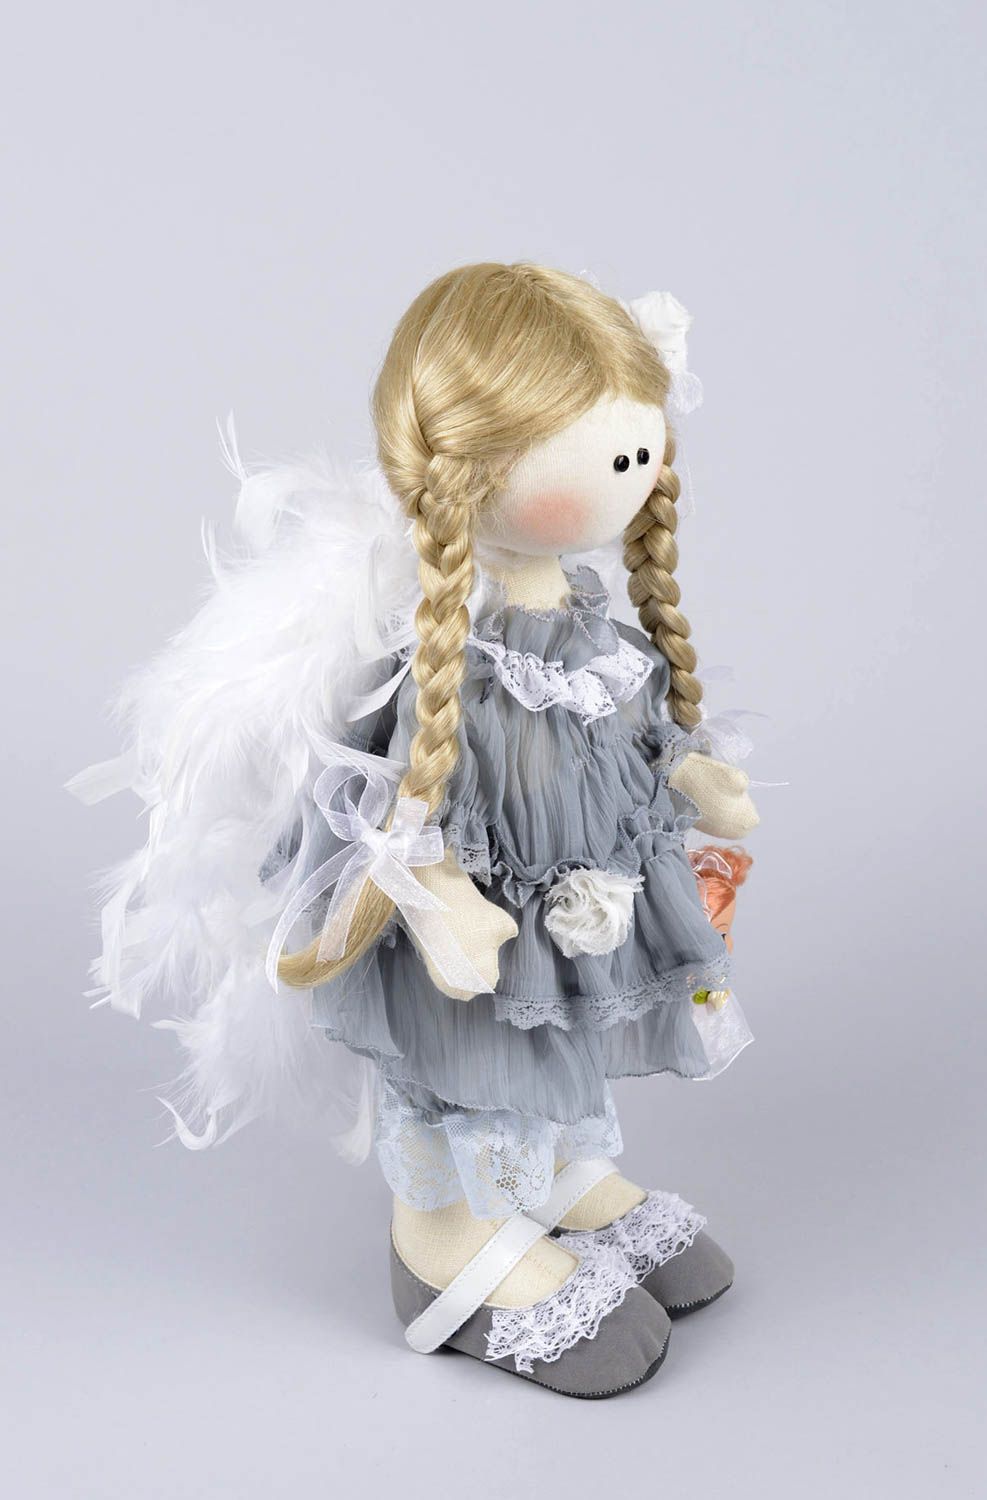 Handmade soft toy girl doll collectible dolls best gifts for girls stuffed toy photo 3